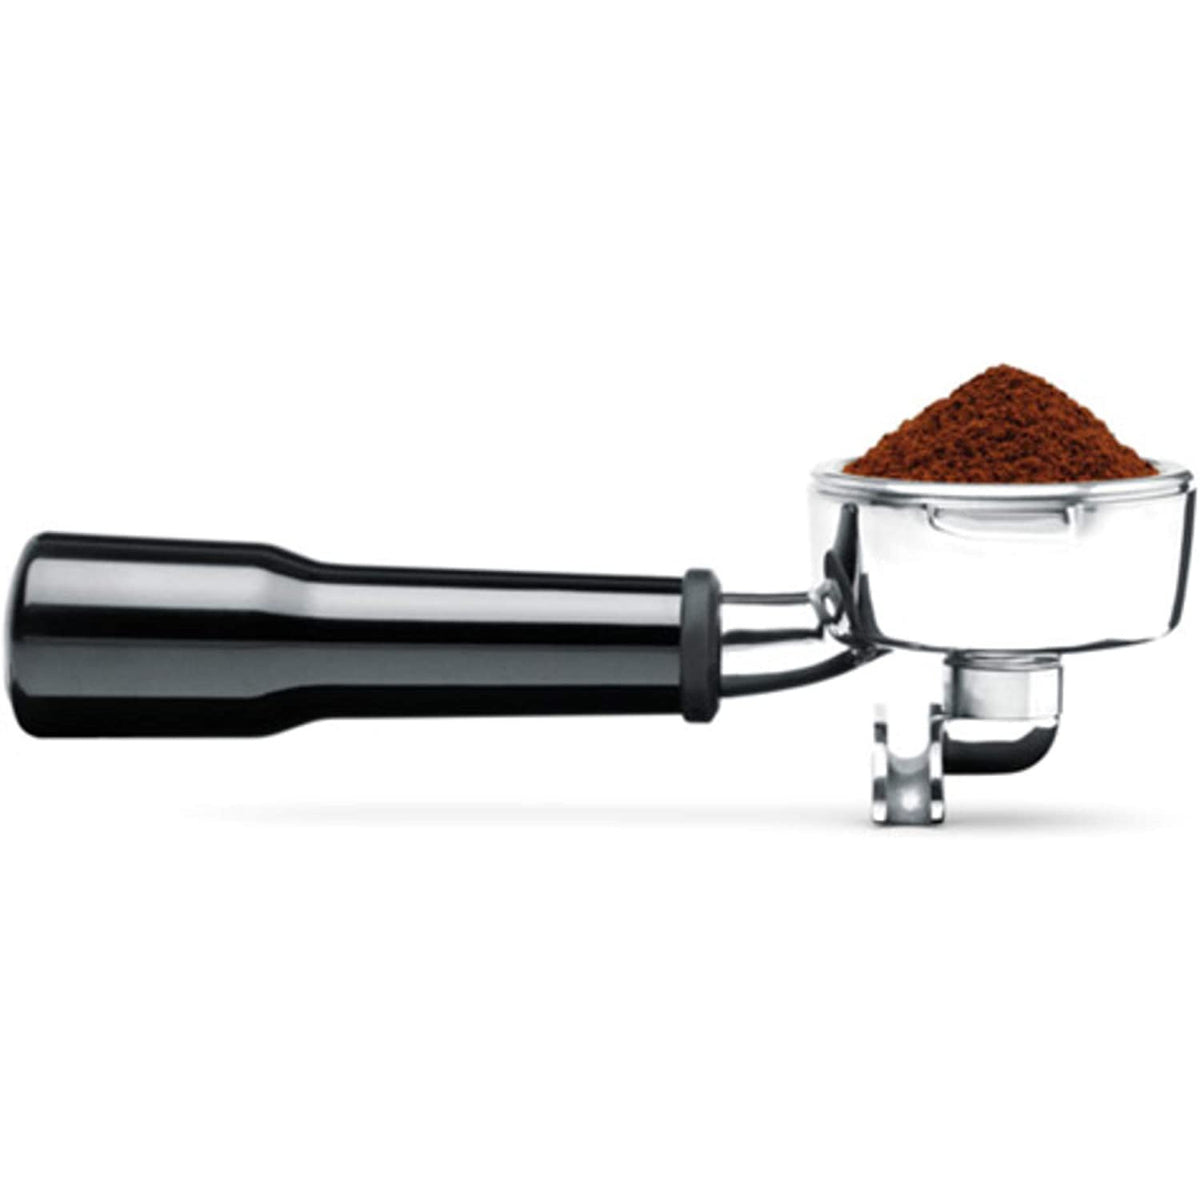 Sage The Barista Express Bean to Cup Coffee Machine - Black Truffle | SES875BTR2GUK1 from Sage - DID Electrical